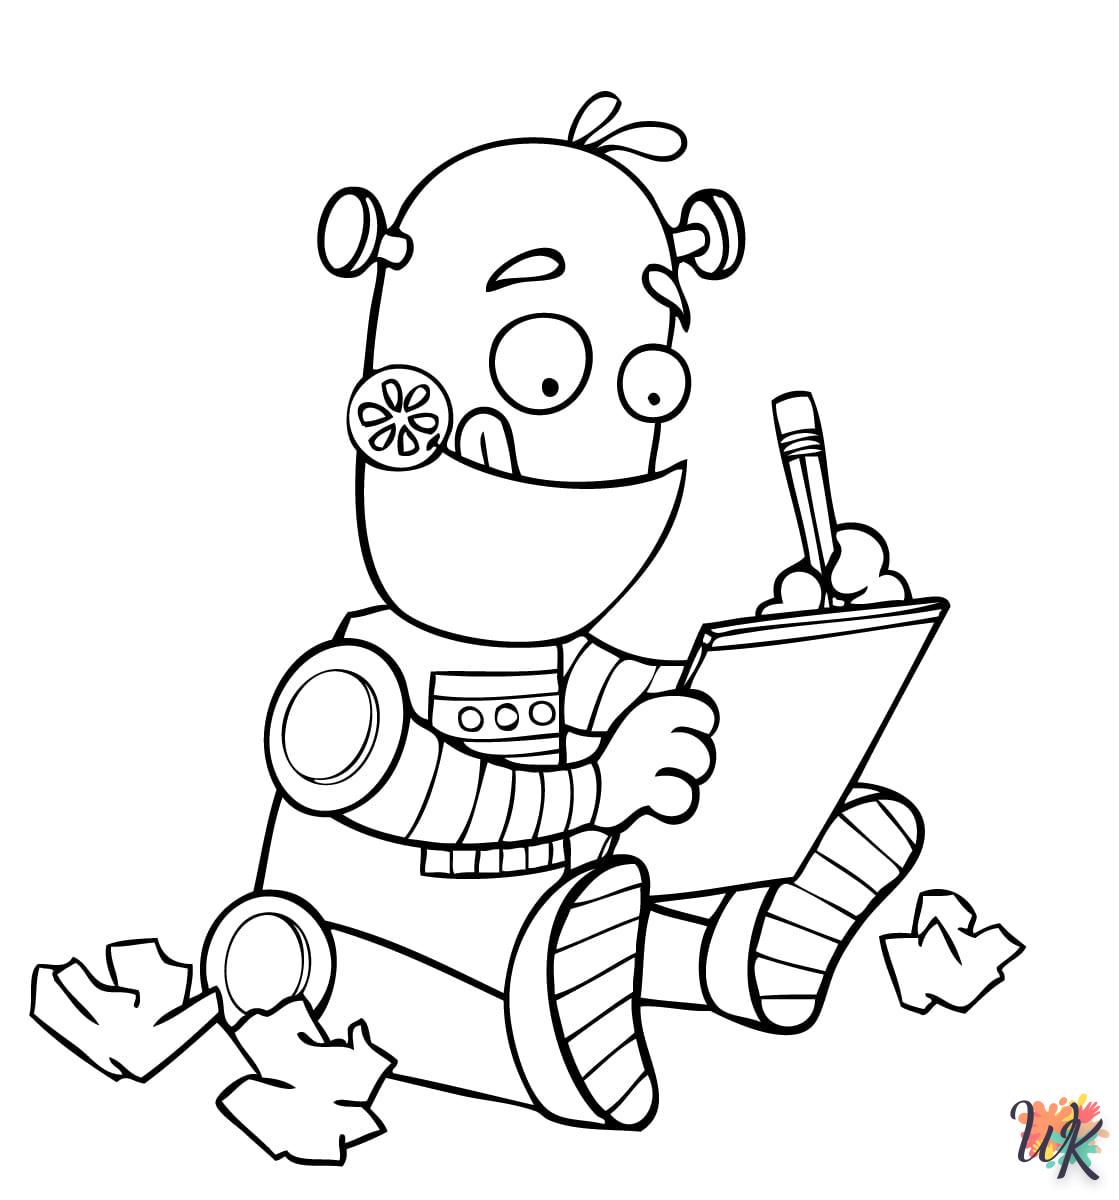 Robot coloring page to print for 4 year old children